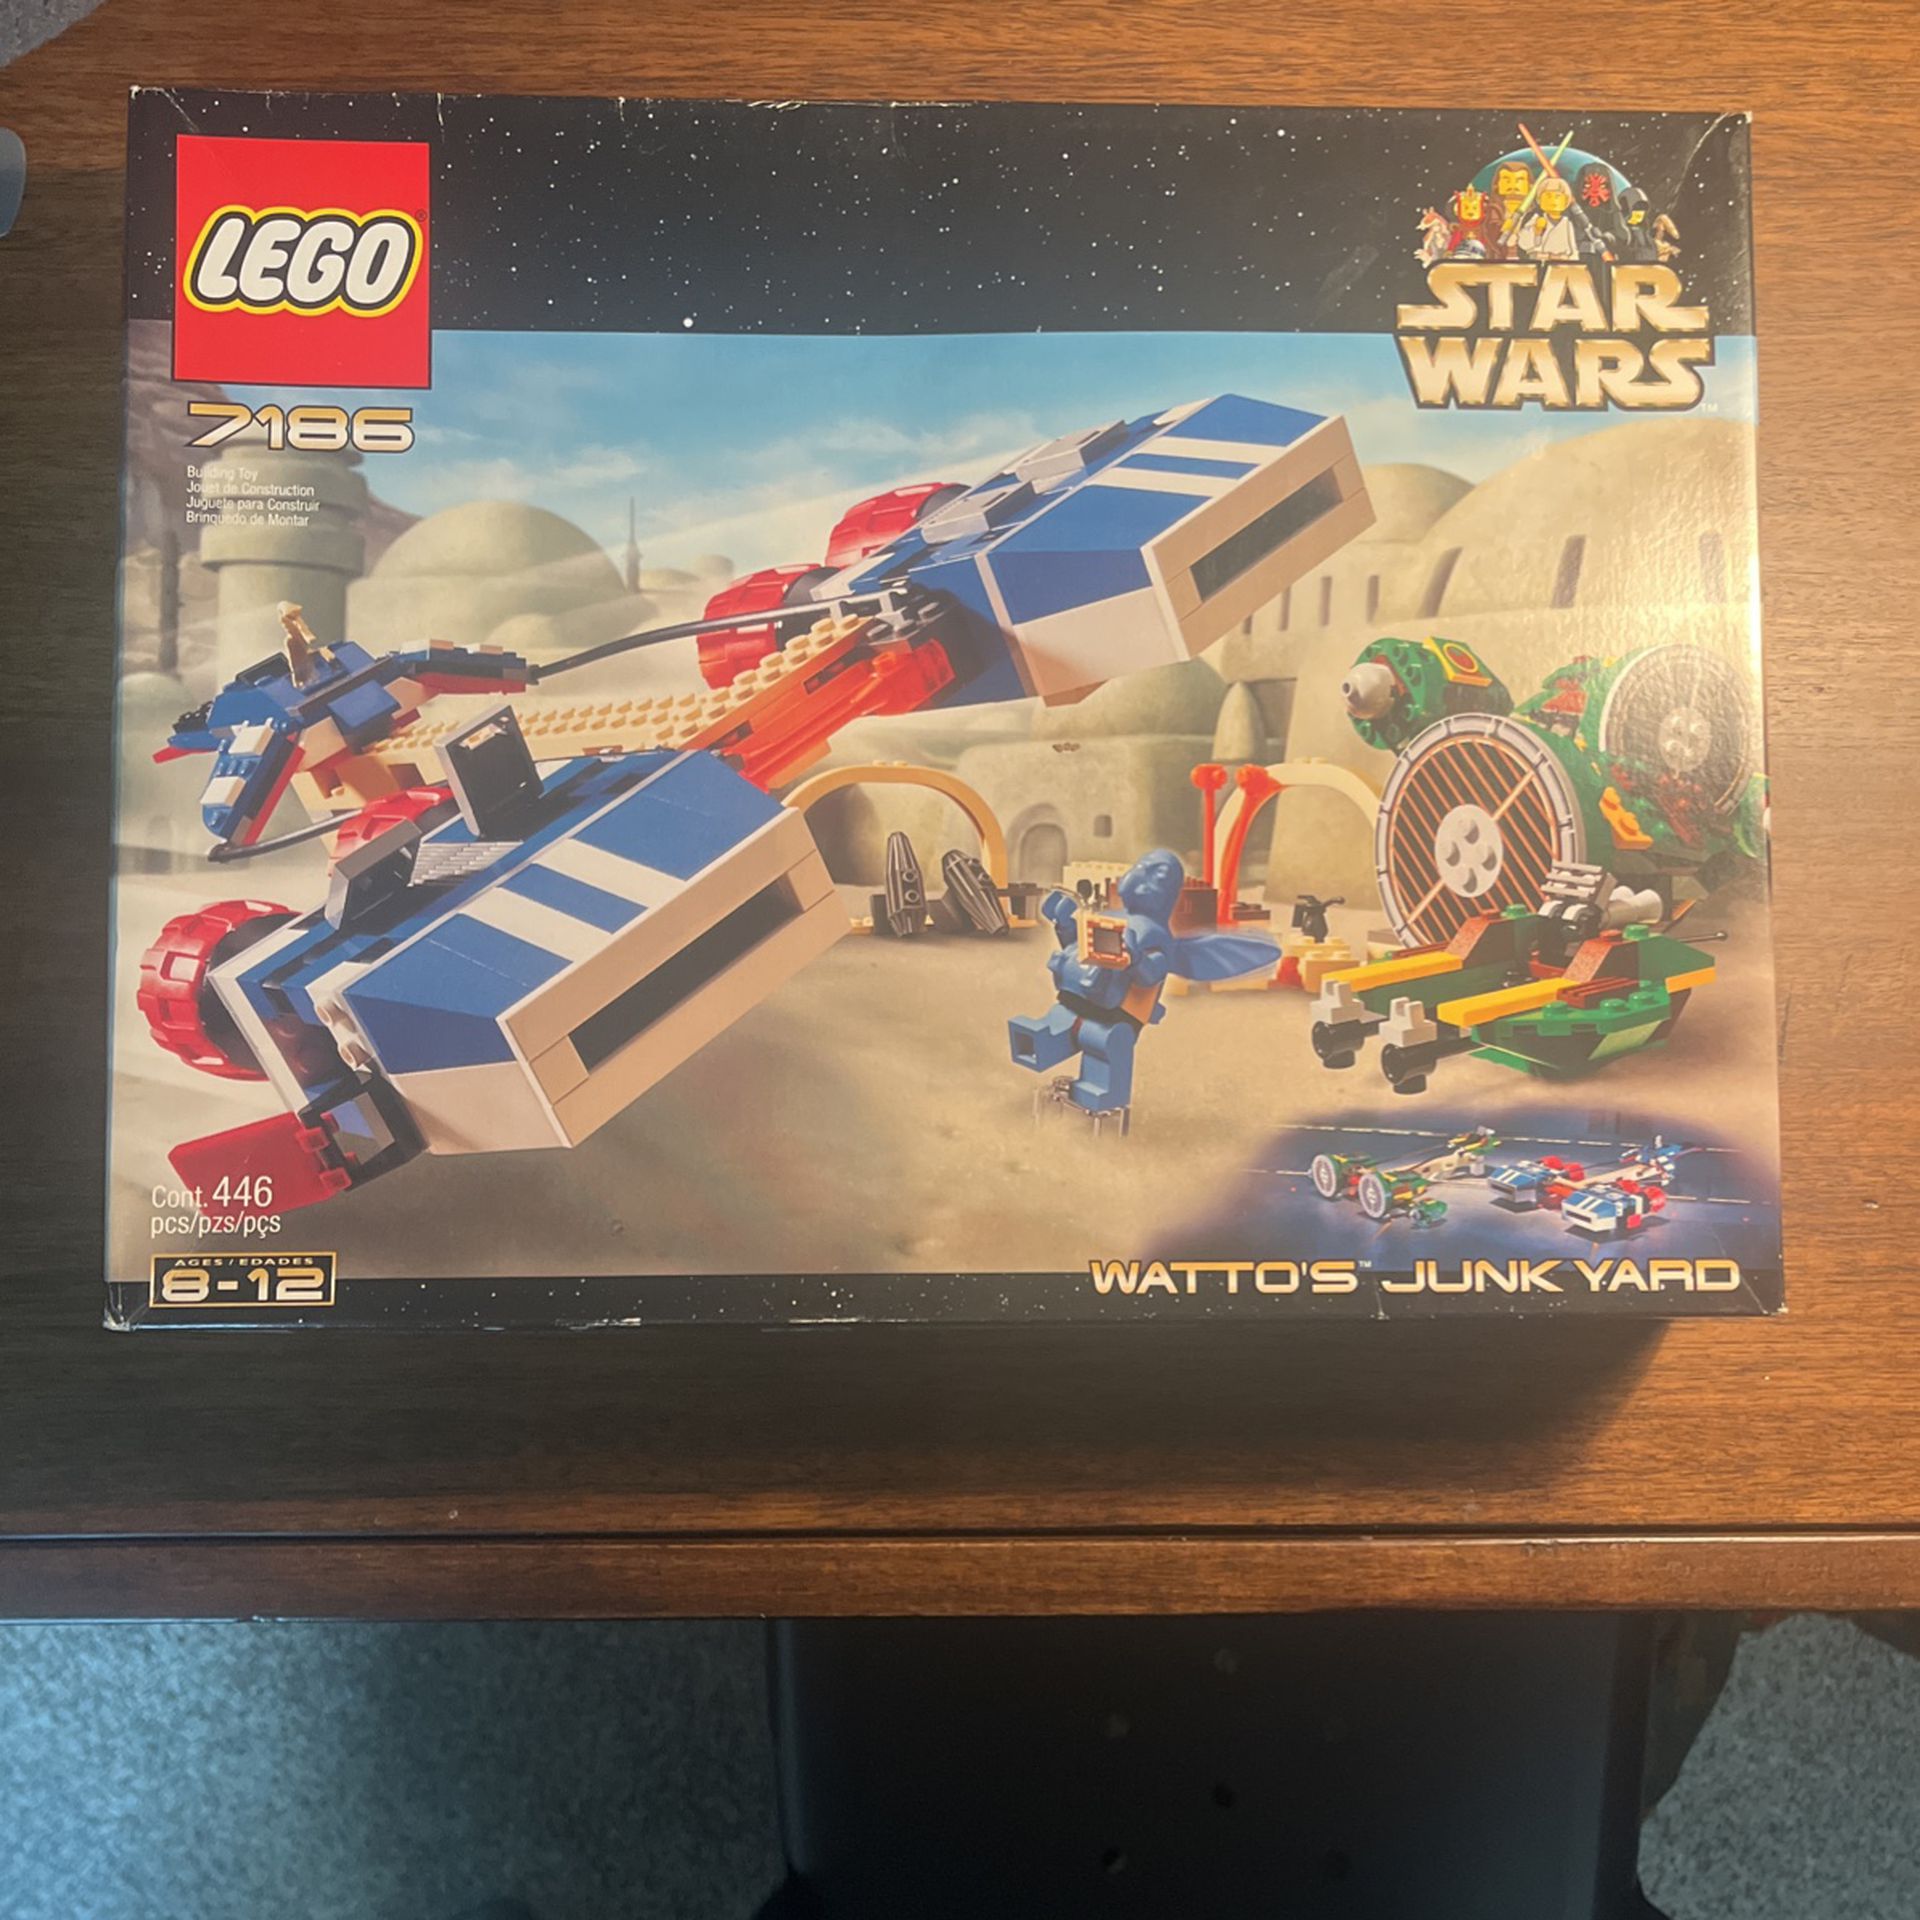 Lego 7186 Junk Yard HTF for Sale in Lacey, - OfferUp